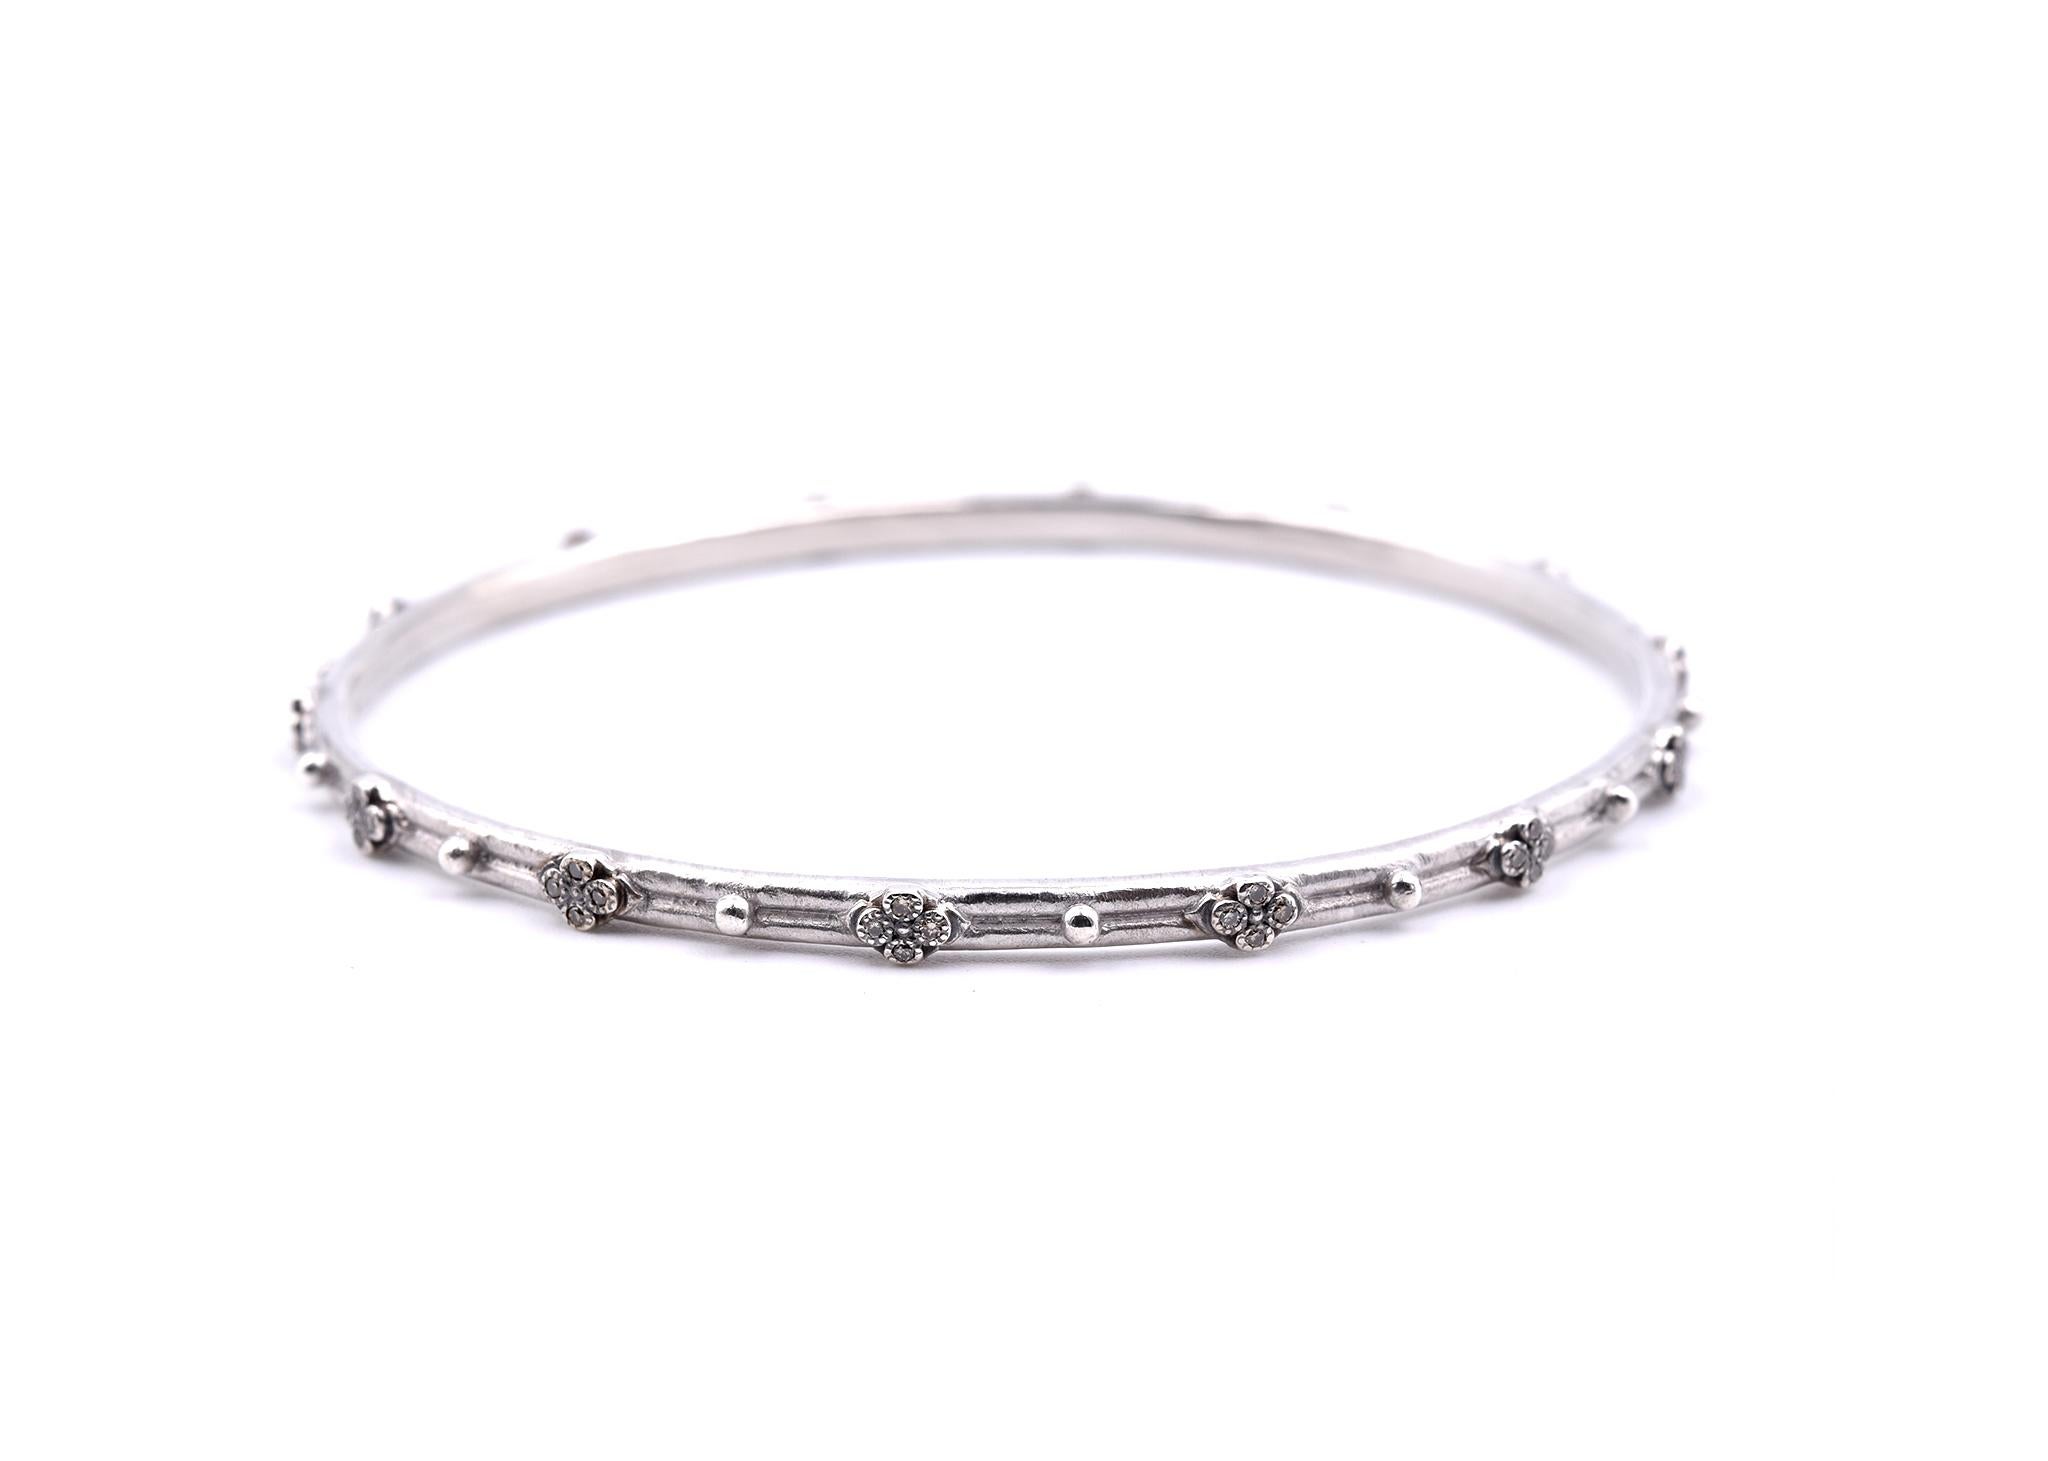 Designer: Armenta
Material: sterling silver
Diamonds: 56 round brilliant cuts = 0.30cttw
Color: chocolate
Dimensions: bangle will fit a 7 ½ inch wrist and it is 3.34mm wide
Weight: 11.61 grams
